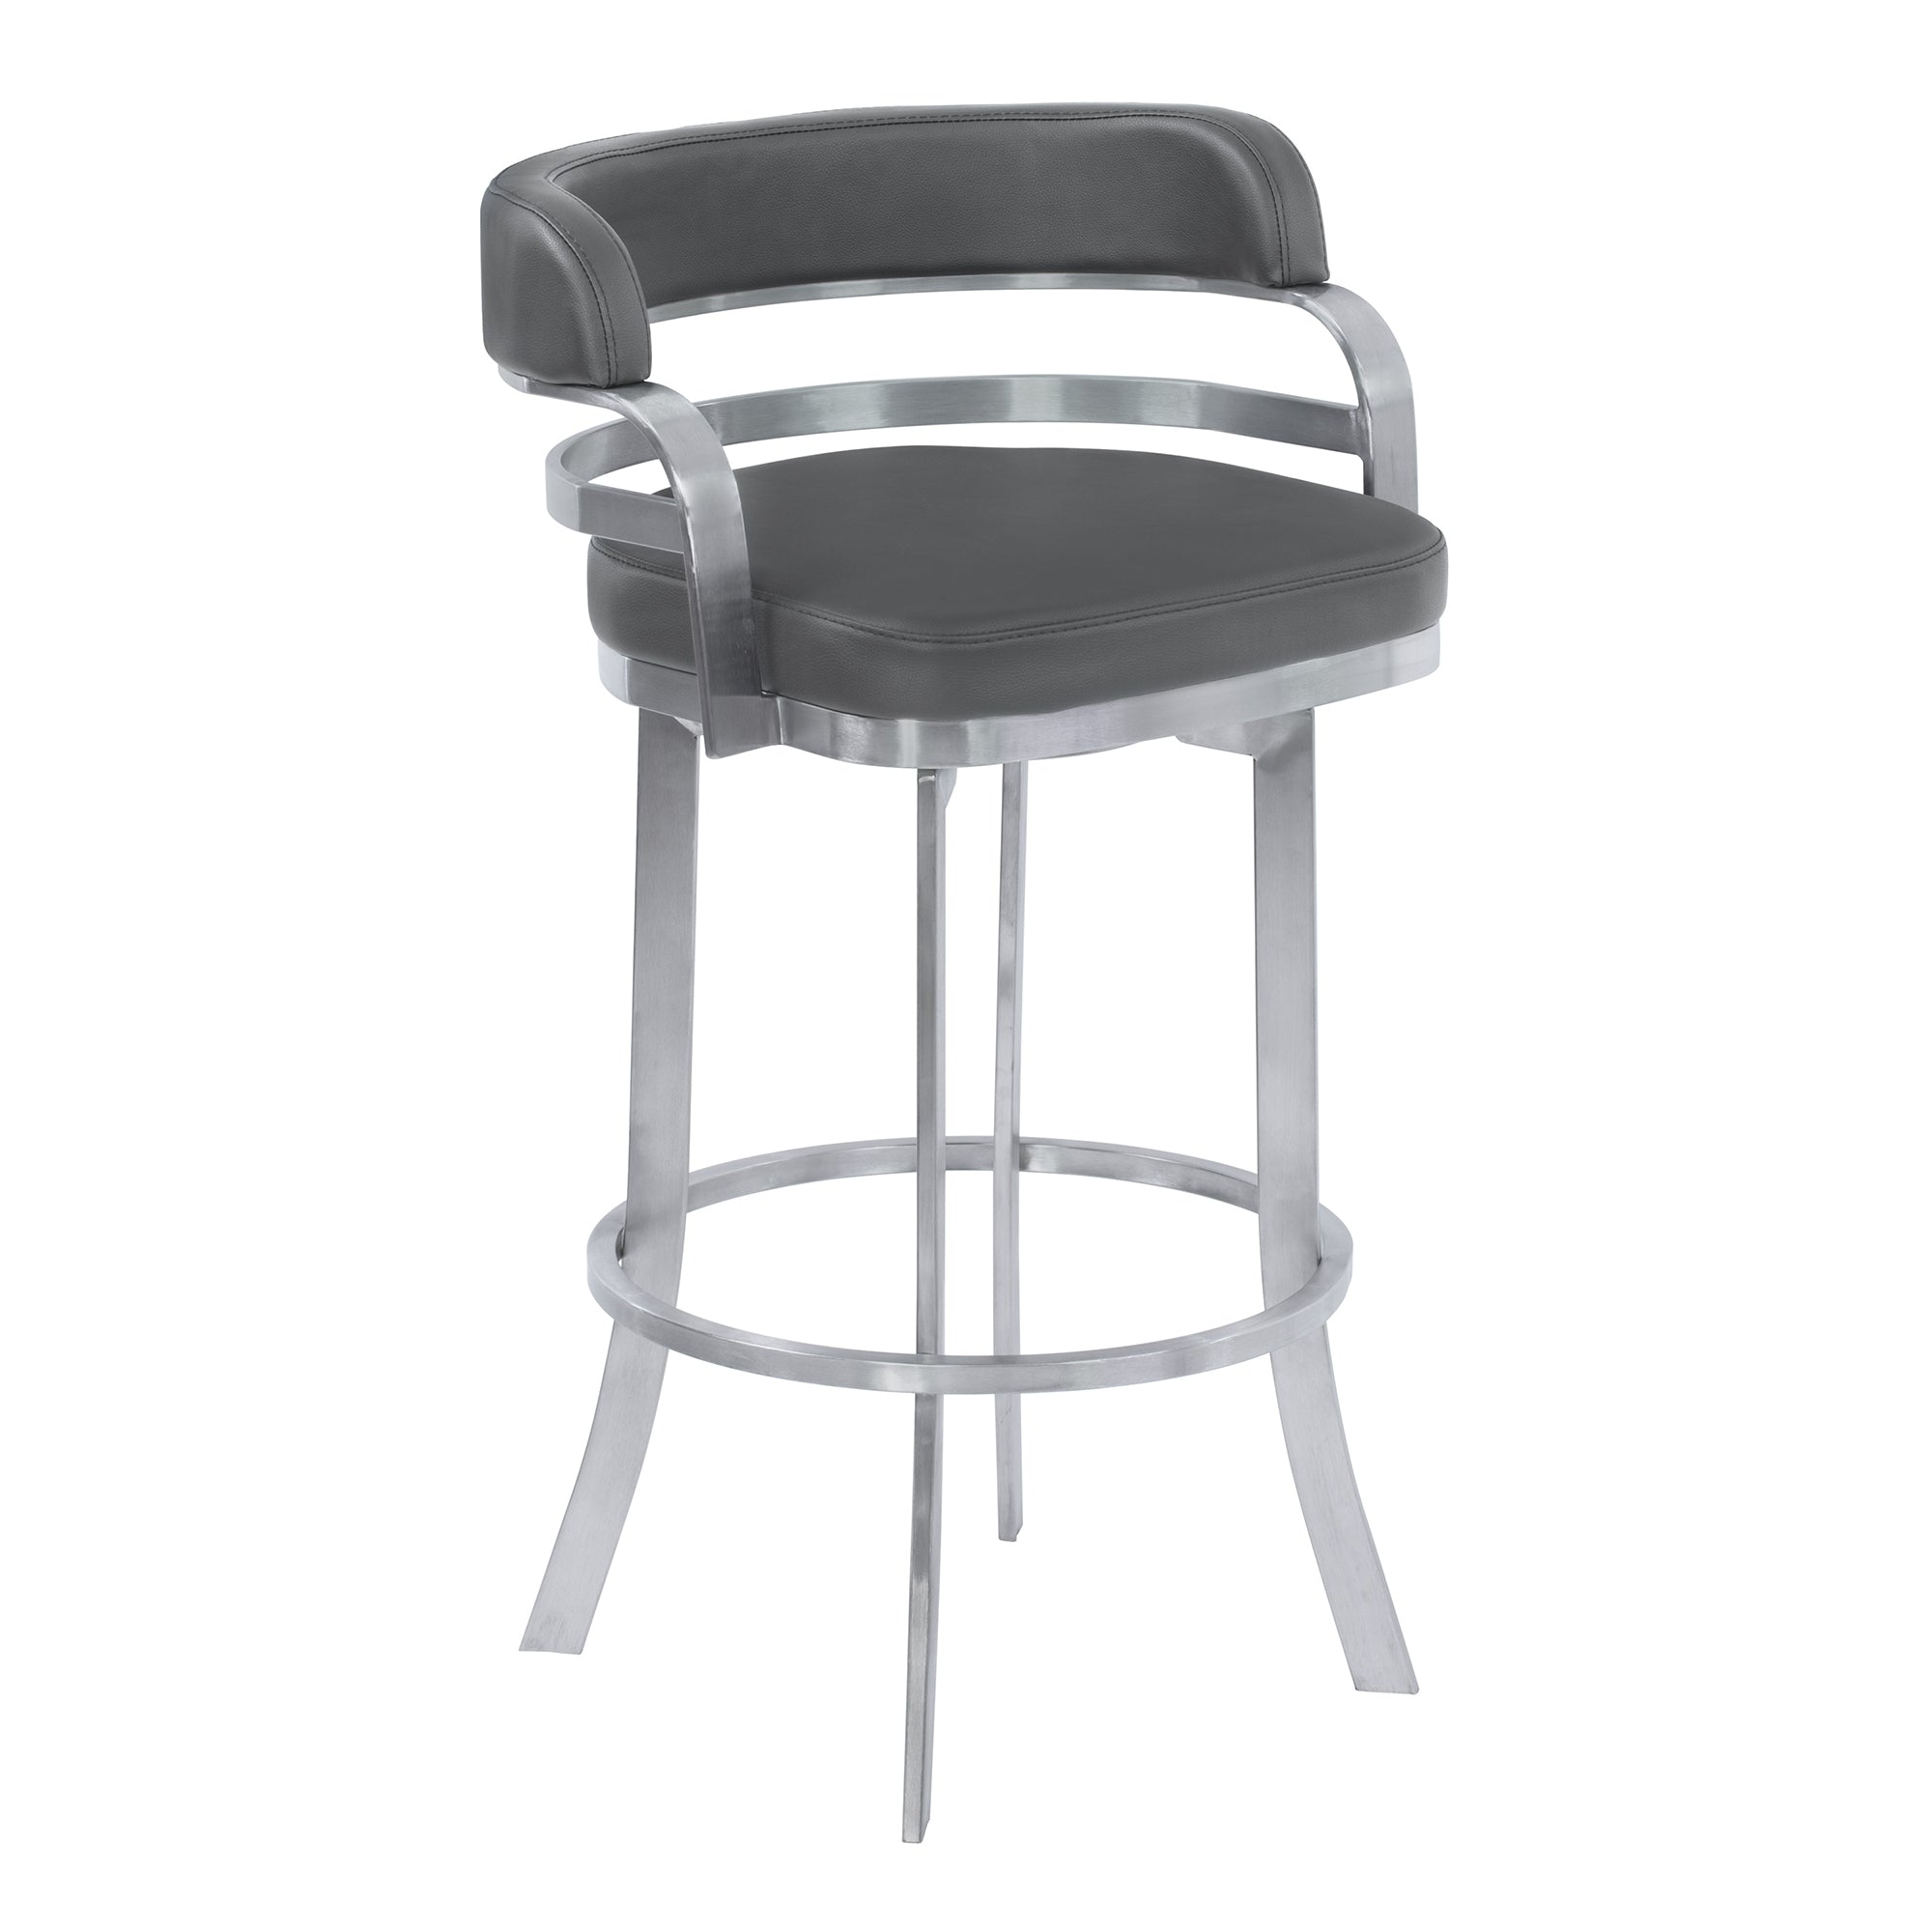 Armen Living Lcprbagrbs26 Prinz 26" Counter Height Metal Swivel Barstool In Gray Faux Leather With Brushed Stainless Steel Finish